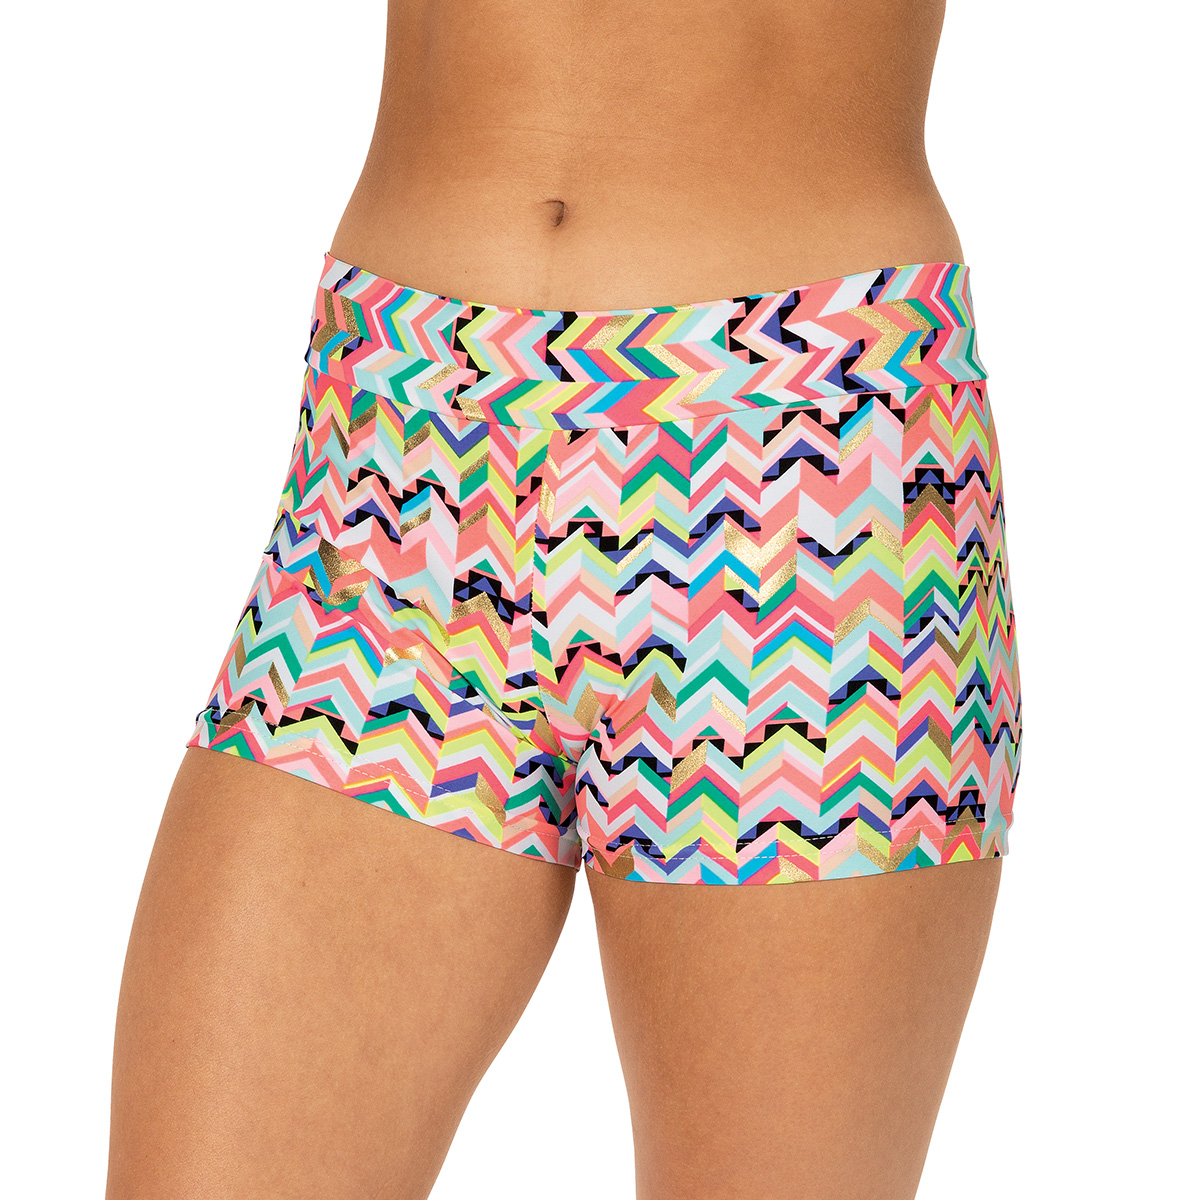 Details about   NWT Soffee Cheerleading Brief Trunks White      Adult M-L-XL 